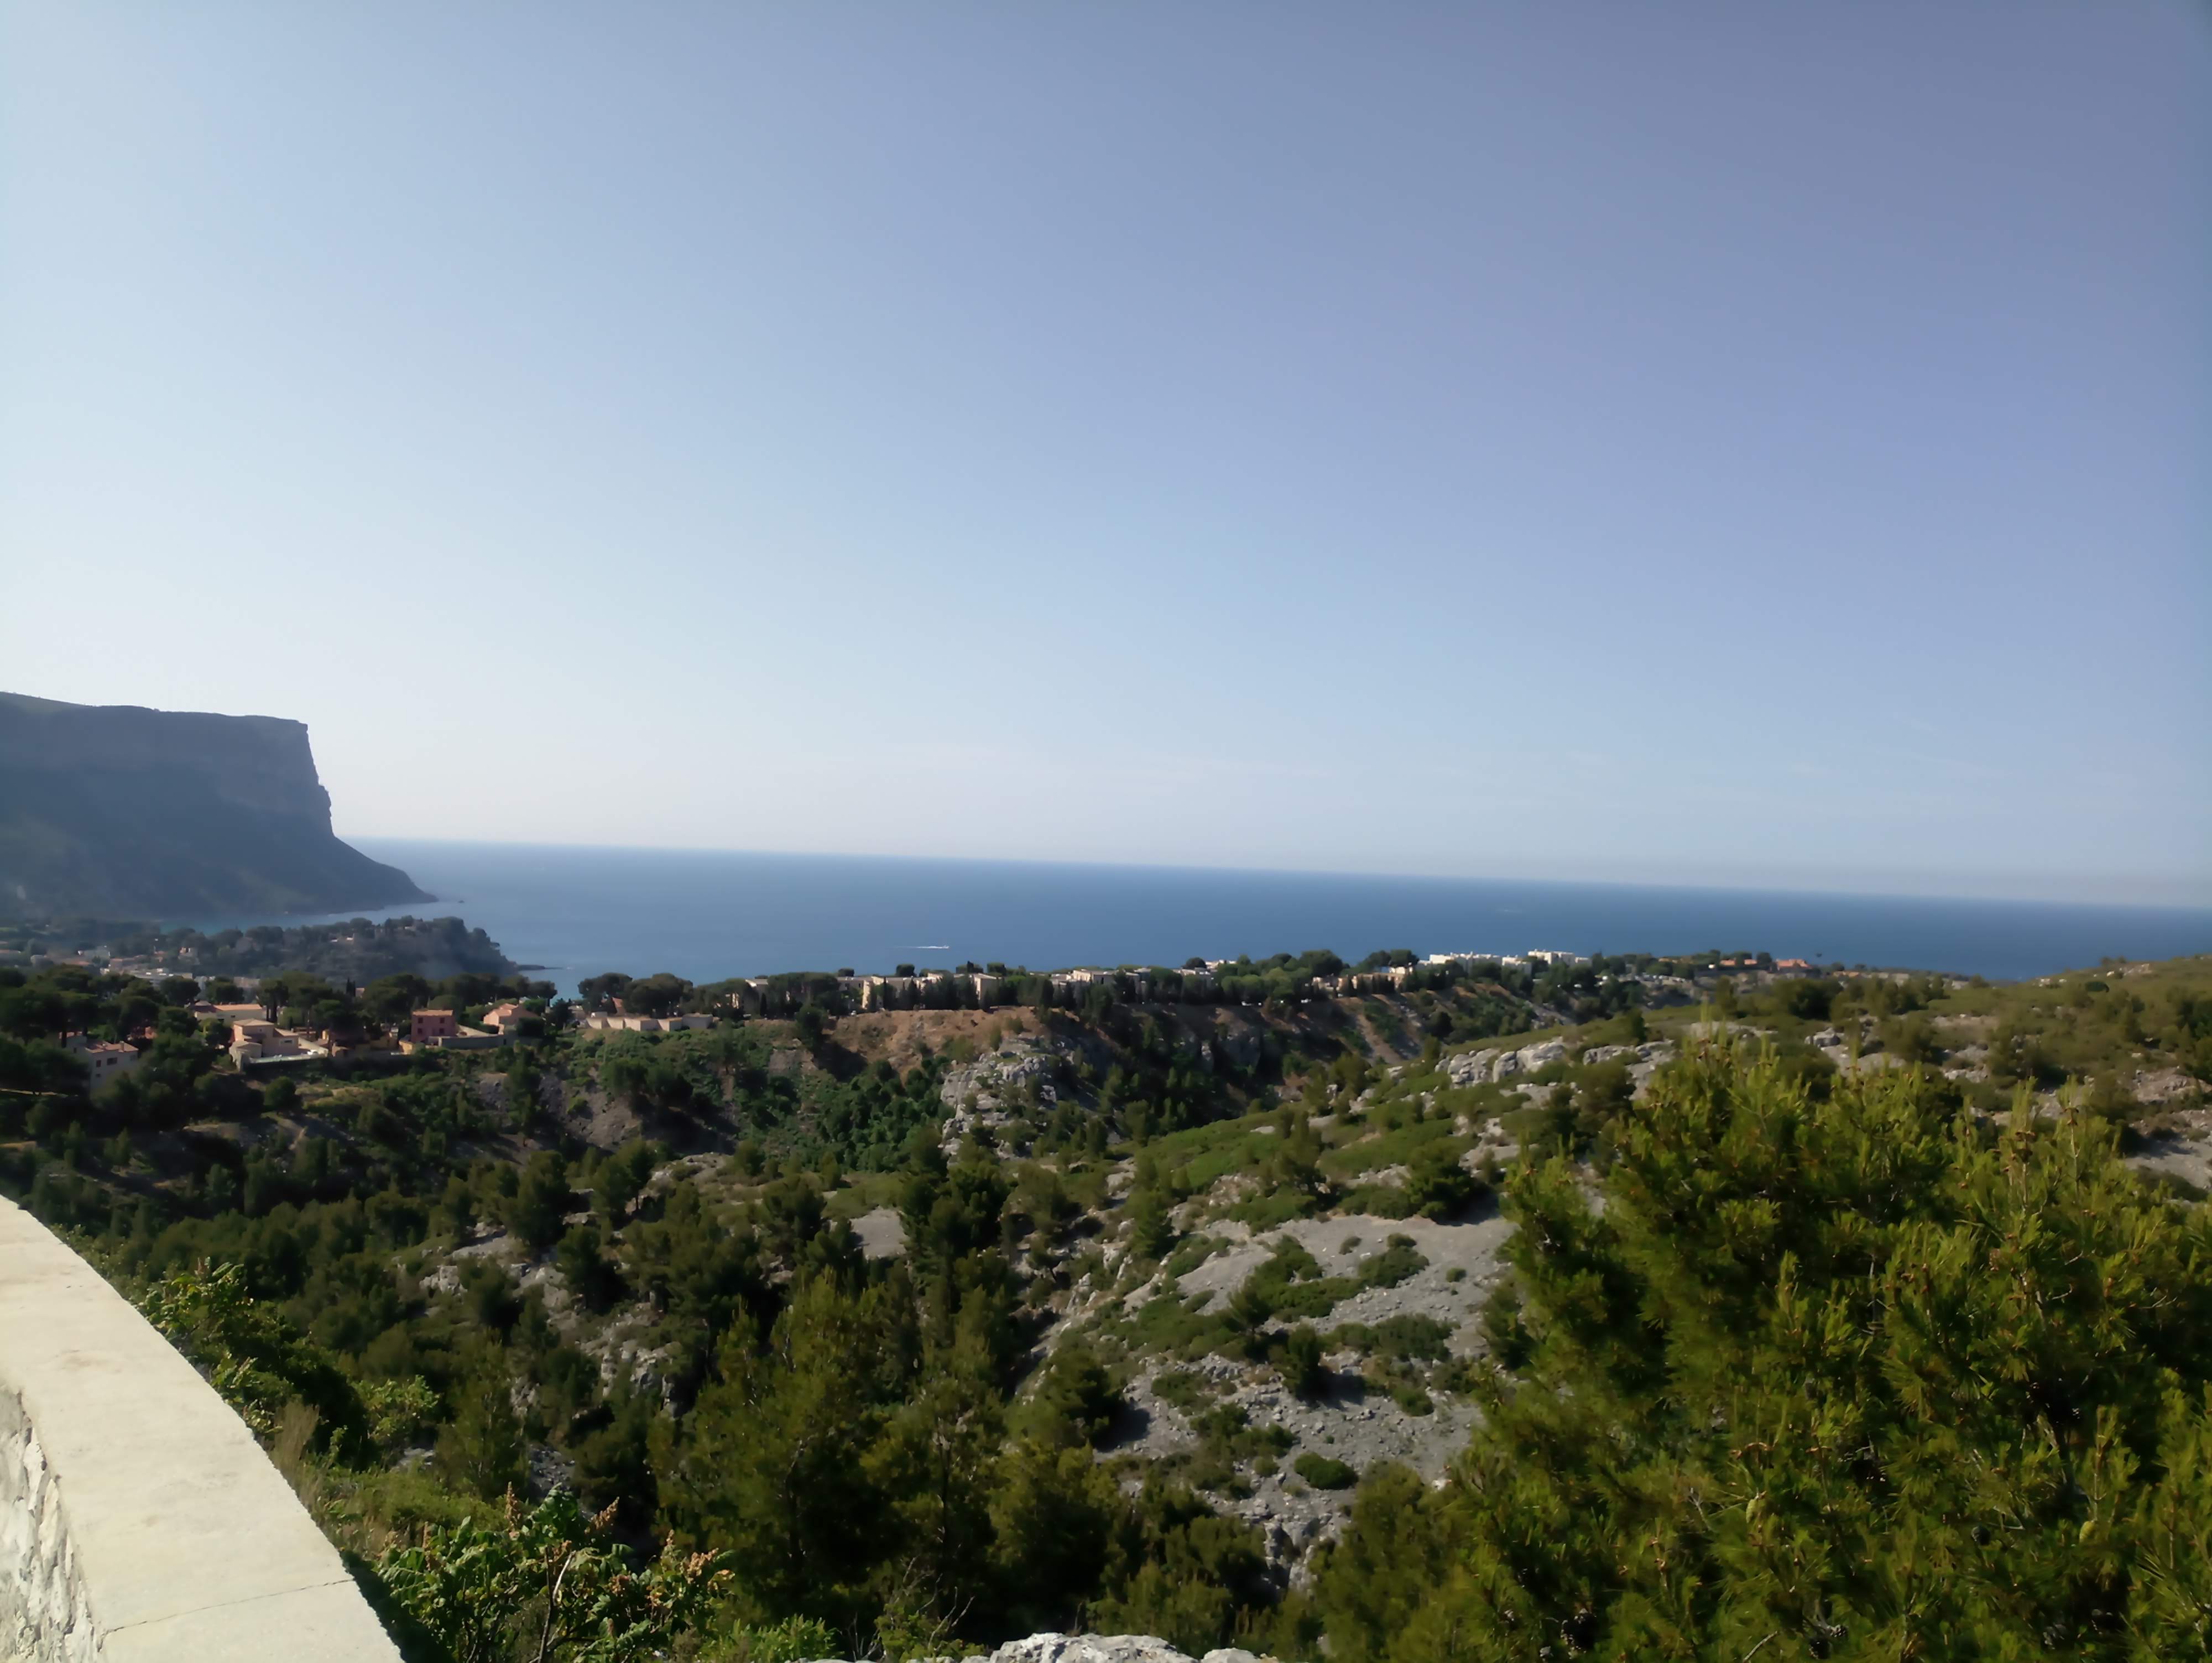 A view from the top of the Marseille-Cassis road